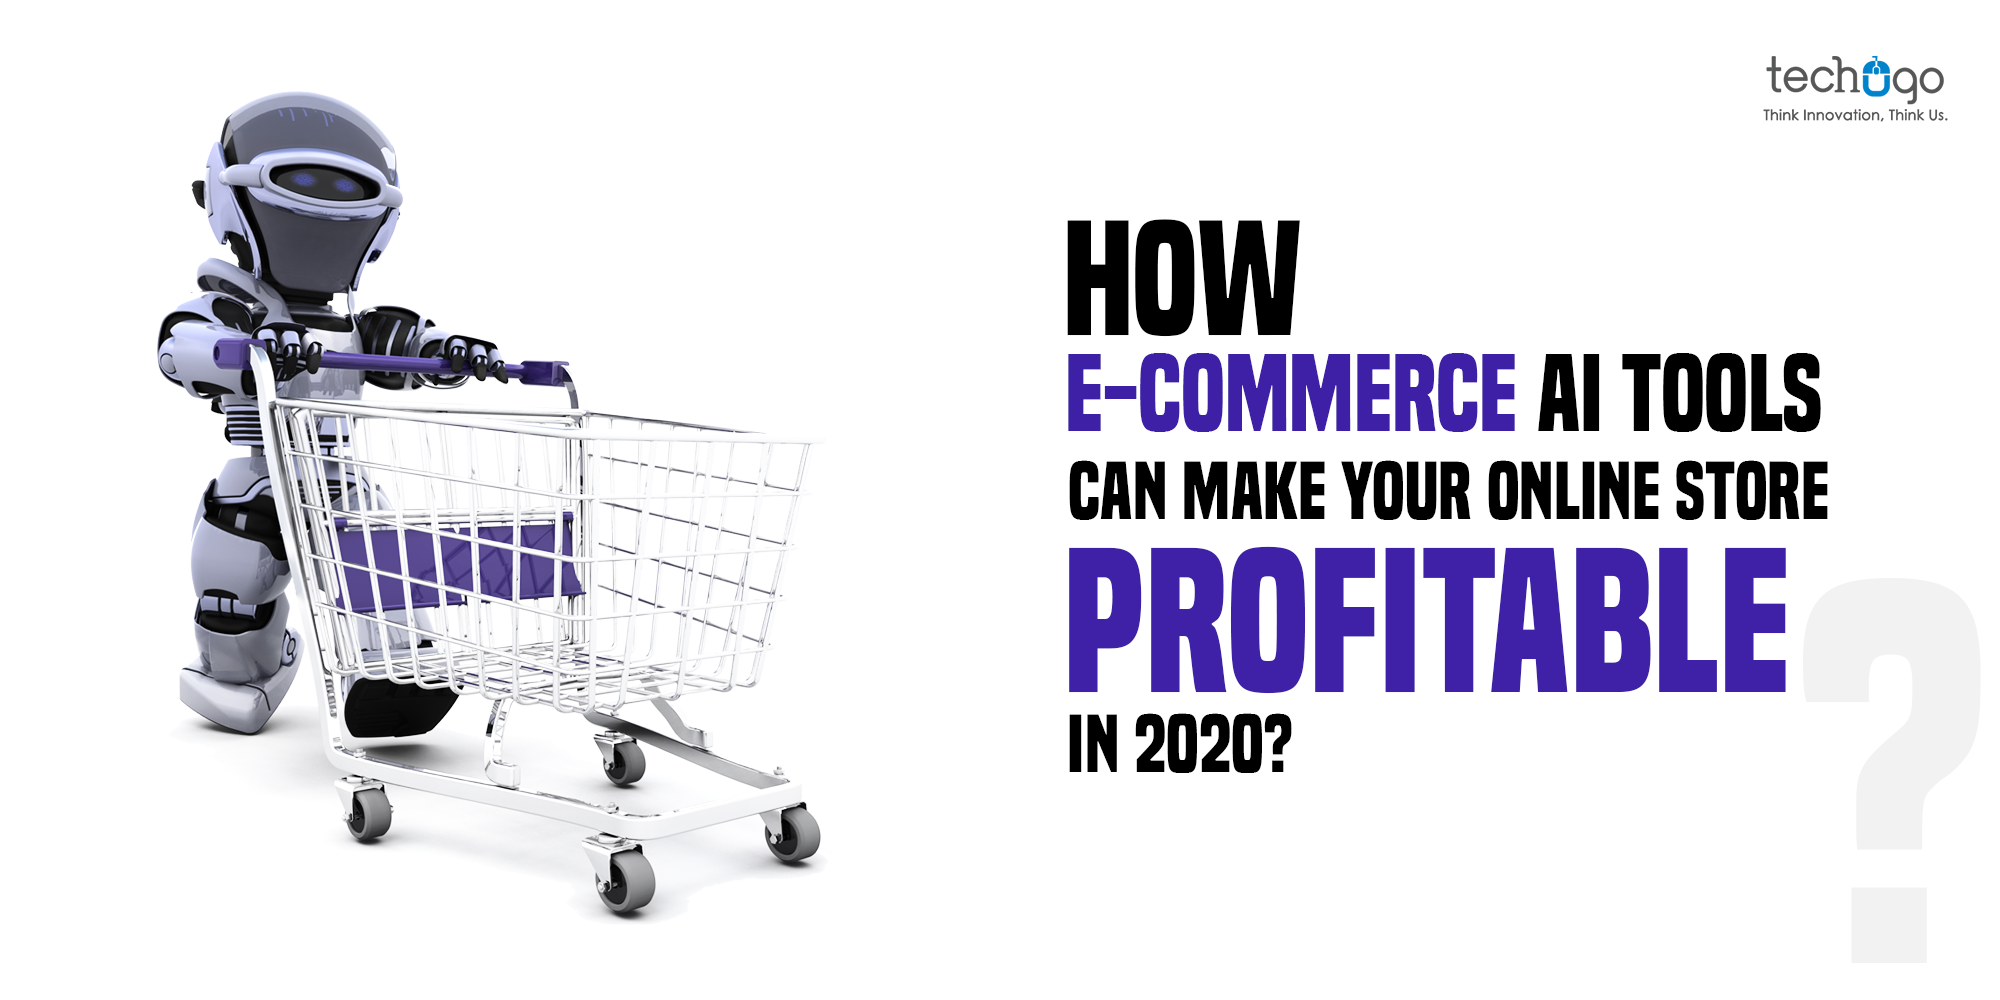 How E-Commerce AI Tools Can Make Your Online Store Profitable In 2020?